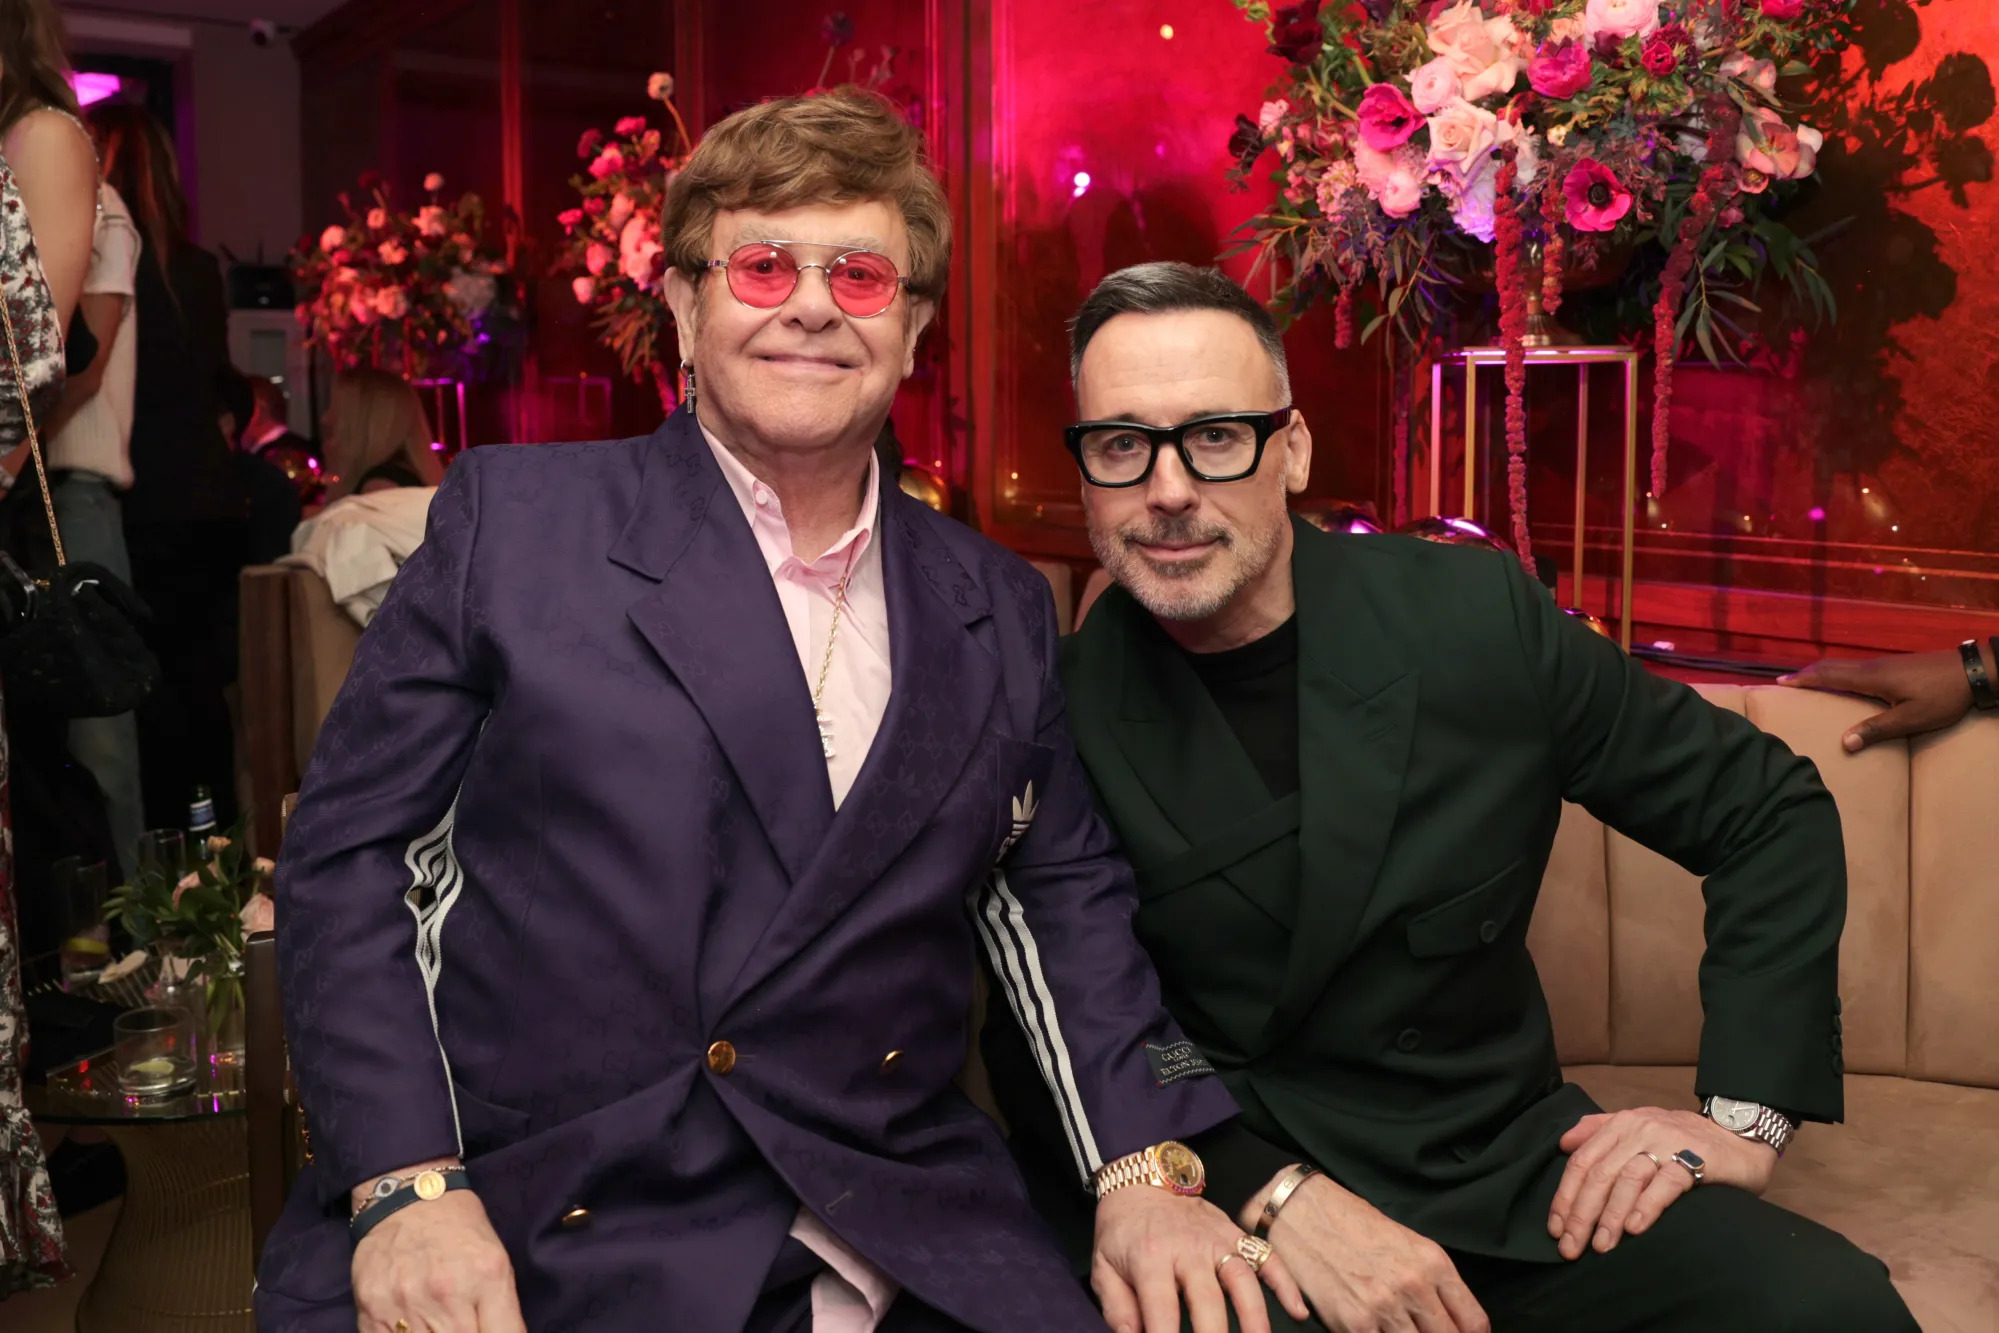 LOS ANGELES, CALIFORNIA - MARCH 10: (L-R) Elton John and David Furnish attend the The CAA Pre-Oscar Party at Sunset Tower Hotel on March 10, 2023 in Los Angeles, California. (Photo by Natasha Campos/Getty Images for CAA)